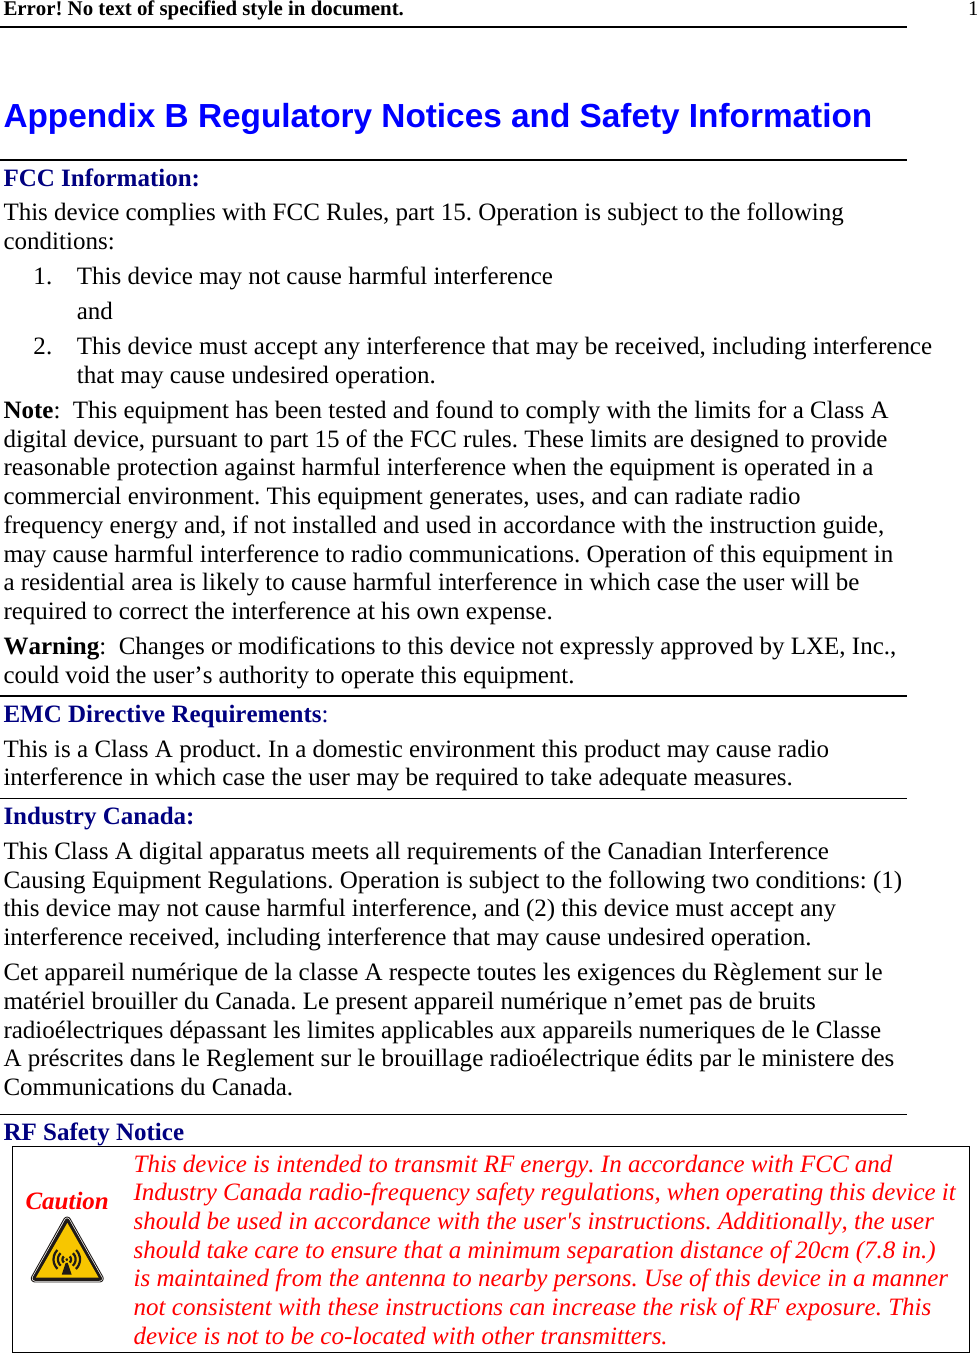 Error! No text of specified style in document. 1 Appendix B Regulatory Notices and Safety Information FCC Information: This device complies with FCC Rules, part 15. Operation is subject to the following conditions: 1.  This device may not cause harmful interference  and 2.  This device must accept any interference that may be received, including interference that may cause undesired operation. Note:  This equipment has been tested and found to comply with the limits for a Class A digital device, pursuant to part 15 of the FCC rules. These limits are designed to provide reasonable protection against harmful interference when the equipment is operated in a commercial environment. This equipment generates, uses, and can radiate radio frequency energy and, if not installed and used in accordance with the instruction guide, may cause harmful interference to radio communications. Operation of this equipment in a residential area is likely to cause harmful interference in which case the user will be required to correct the interference at his own expense. Warning:  Changes or modifications to this device not expressly approved by LXE, Inc., could void the user’s authority to operate this equipment. EMC Directive Requirements: This is a Class A product. In a domestic environment this product may cause radio interference in which case the user may be required to take adequate measures. Industry Canada: This Class A digital apparatus meets all requirements of the Canadian Interference Causing Equipment Regulations. Operation is subject to the following two conditions: (1) this device may not cause harmful interference, and (2) this device must accept any interference received, including interference that may cause undesired operation. Cet appareil numérique de la classe A respecte toutes les exigences du Règlement sur le matériel brouiller du Canada. Le present appareil numérique n’emet pas de bruits radioélectriques dépassant les limites applicables aux appareils numeriques de le Classe A préscrites dans le Reglement sur le brouillage radioélectrique édits par le ministere des Communications du Canada. RF Safety Notice Caution   This device is intended to transmit RF energy. In accordance with FCC and Industry Canada radio-frequency safety regulations, when operating this device it should be used in accordance with the user&apos;s instructions. Additionally, the user should take care to ensure that a minimum separation distance of 20cm (7.8 in.) is maintained from the antenna to nearby persons. Use of this device in a manner not consistent with these instructions can increase the risk of RF exposure. This device is not to be co-located with other transmitters. 